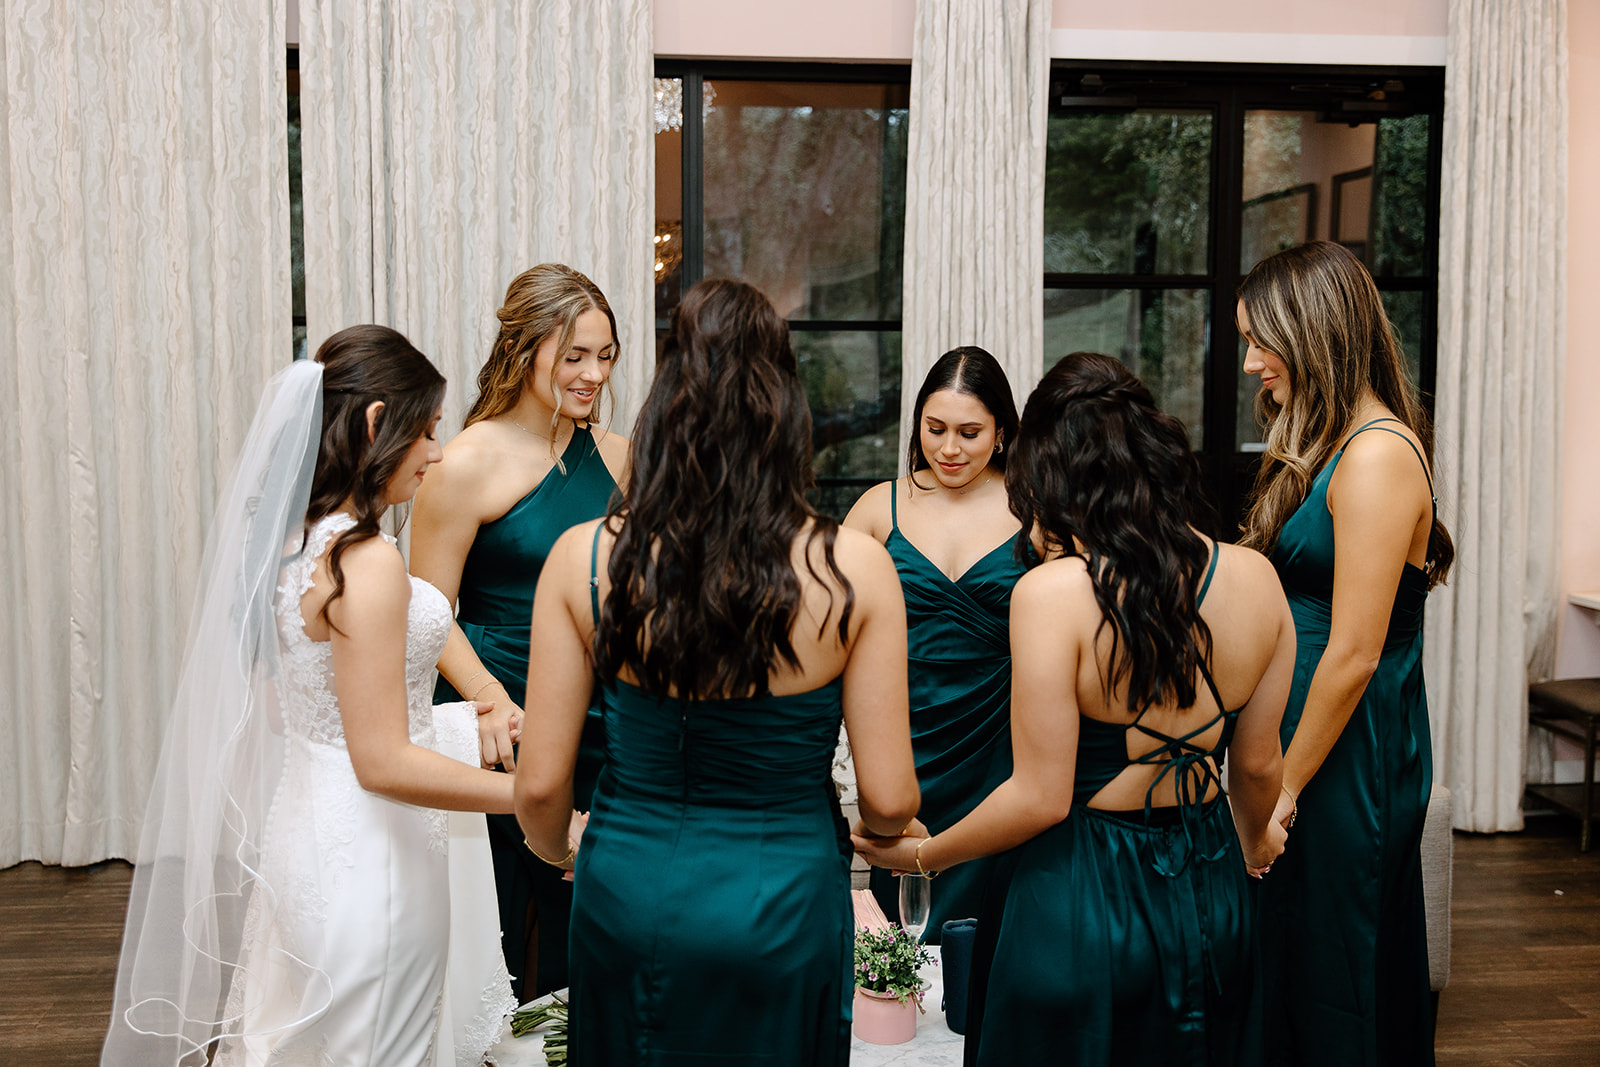 Bride and her bridesmaids praying before the ceremony